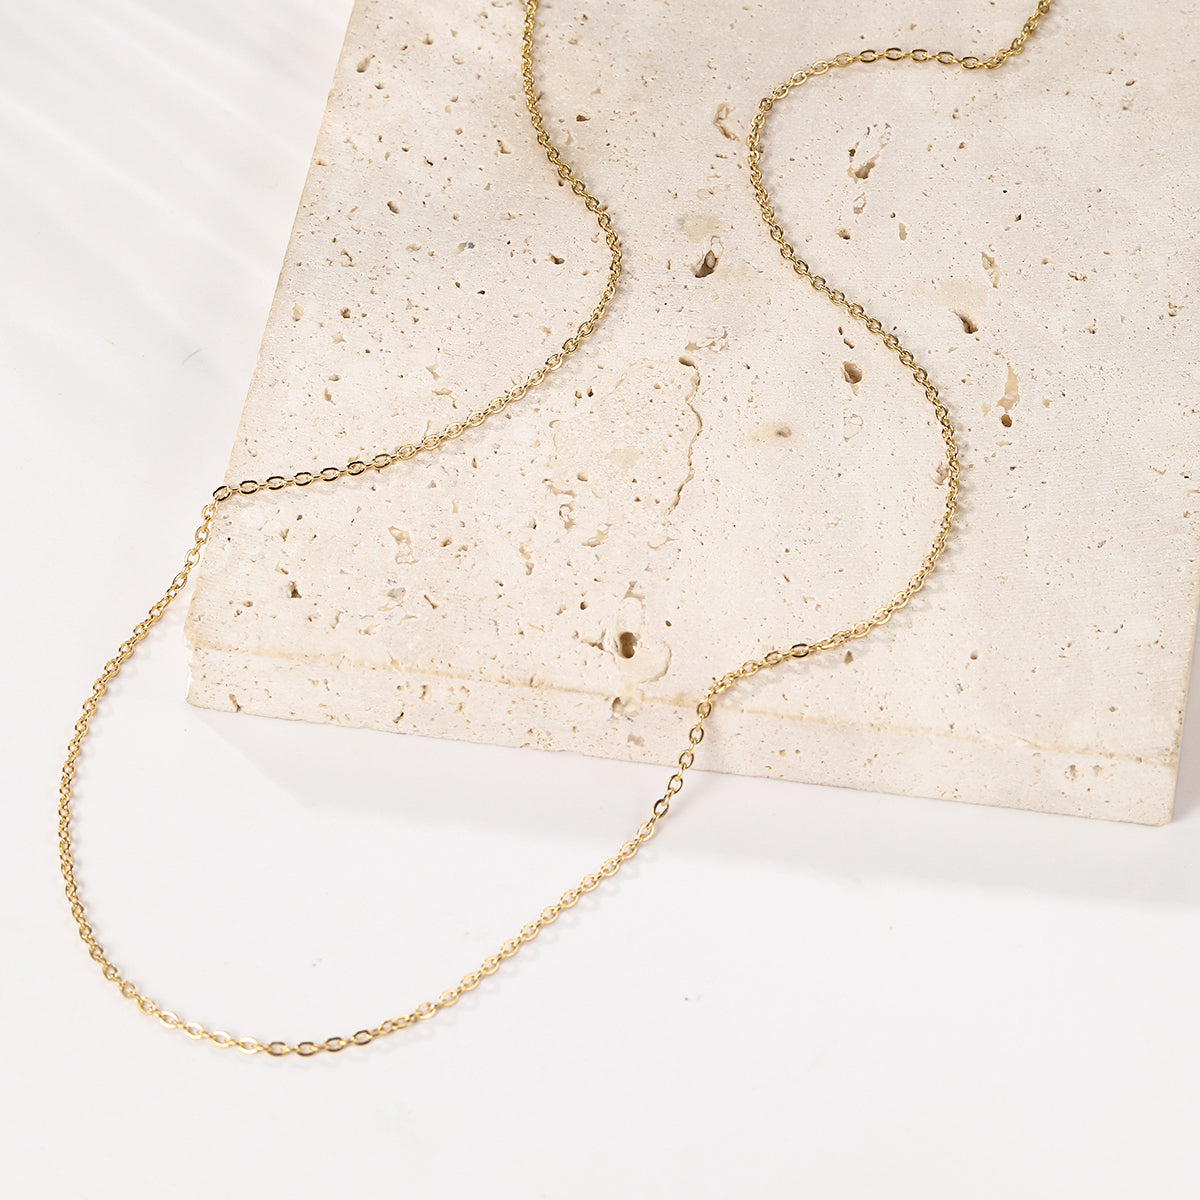 Unisex Cable Chain Necklace Gold